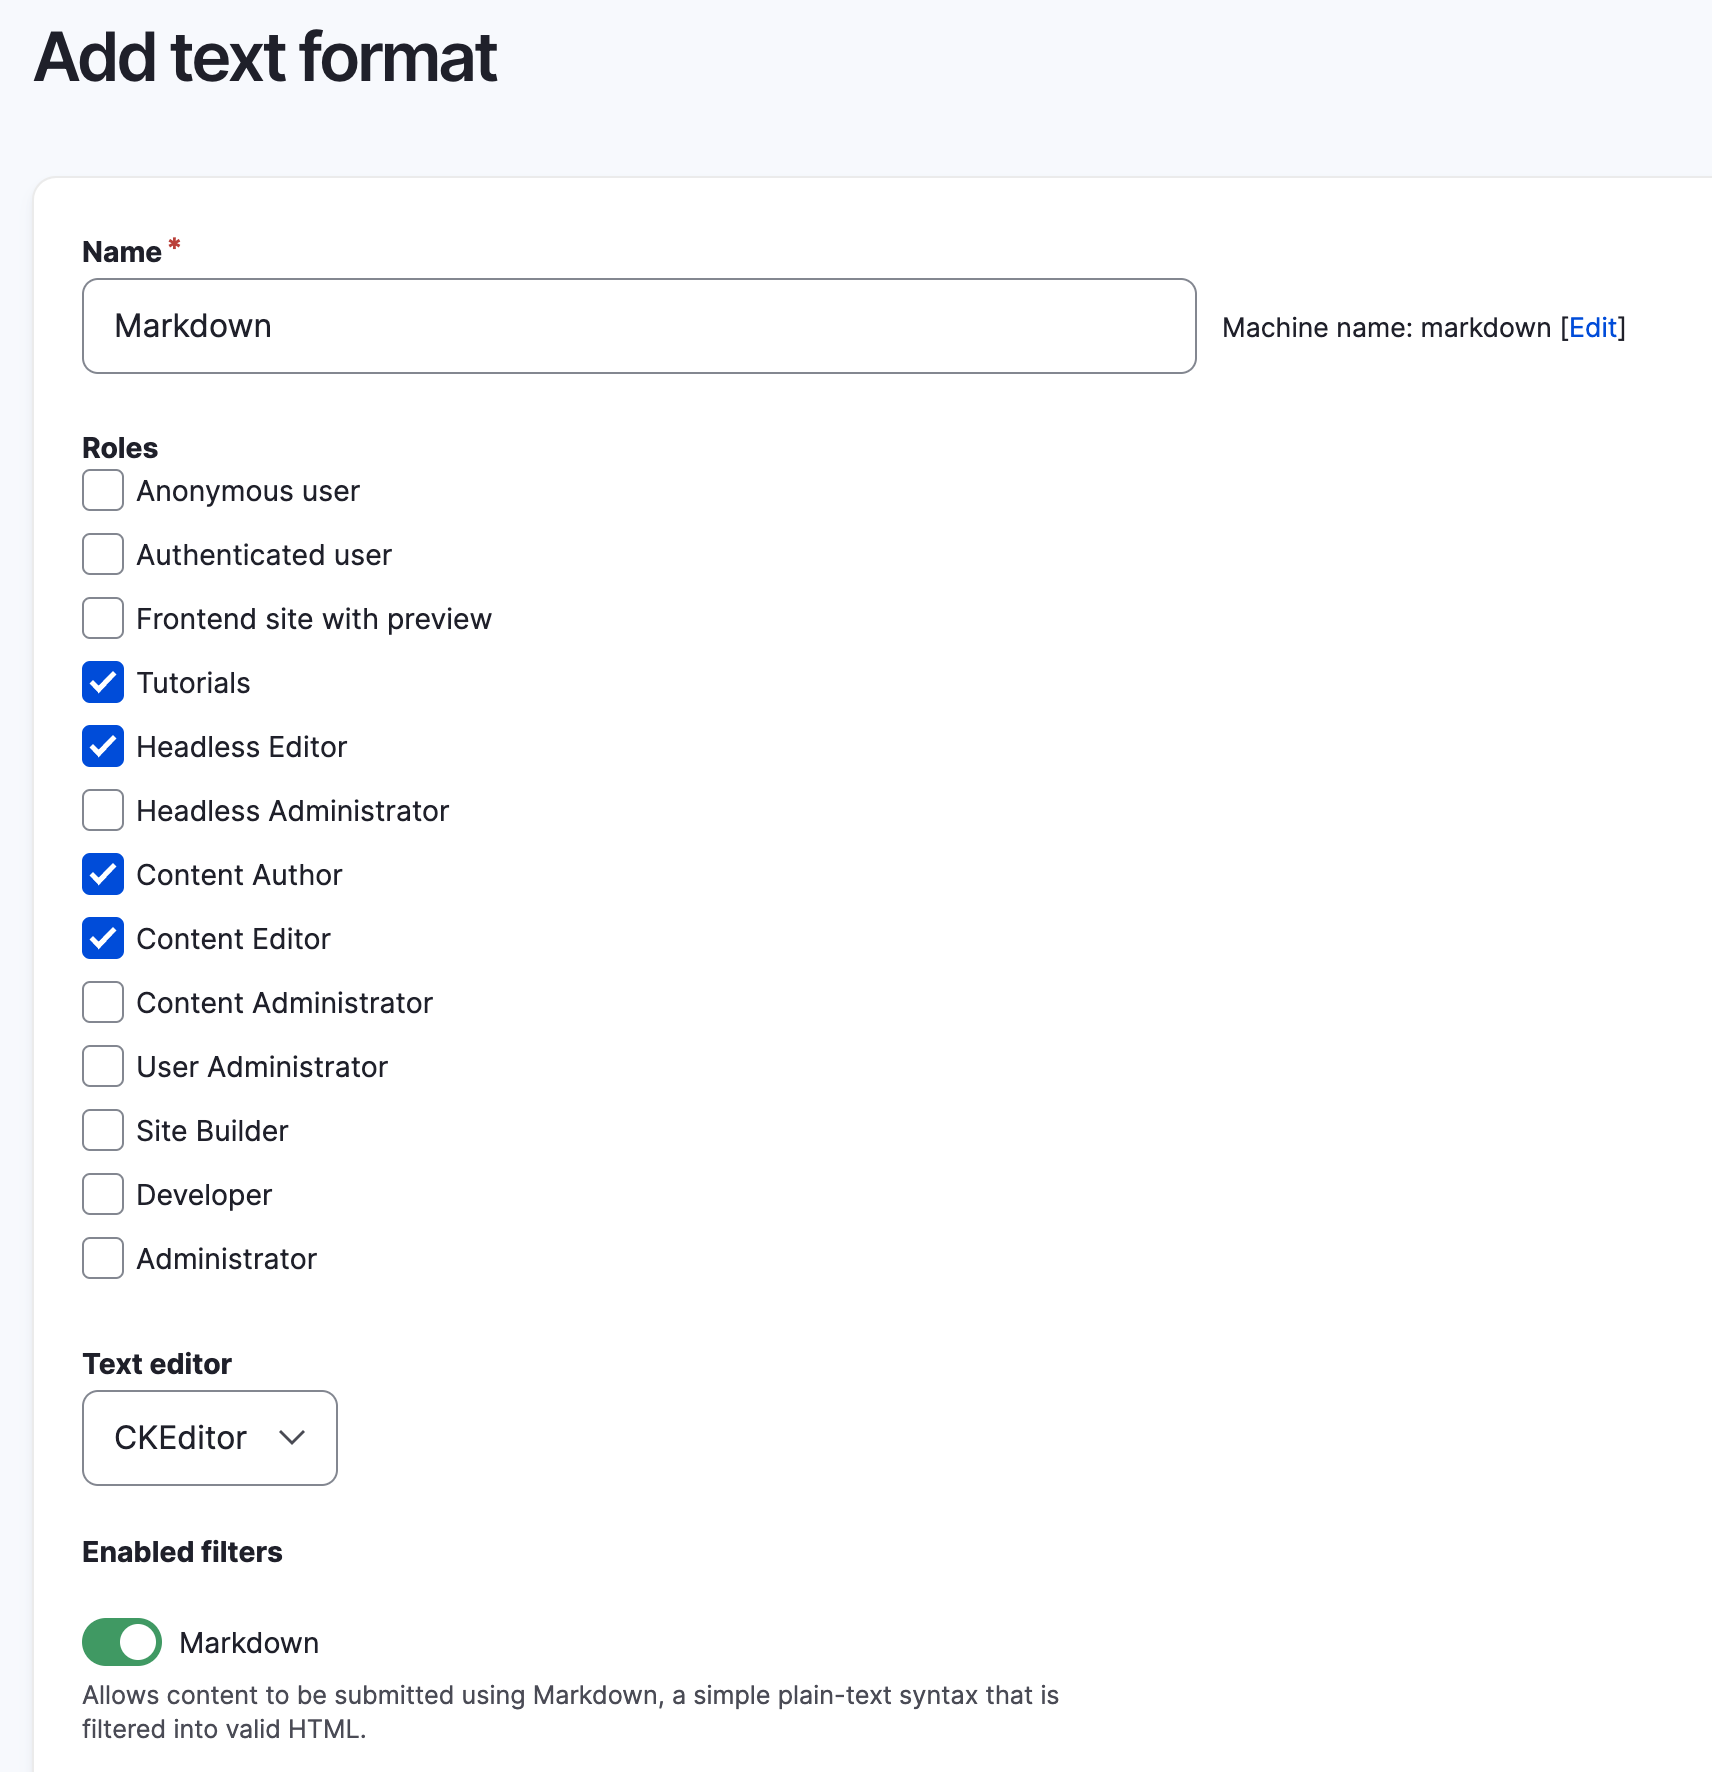 Form for creating a new text format in Drupal